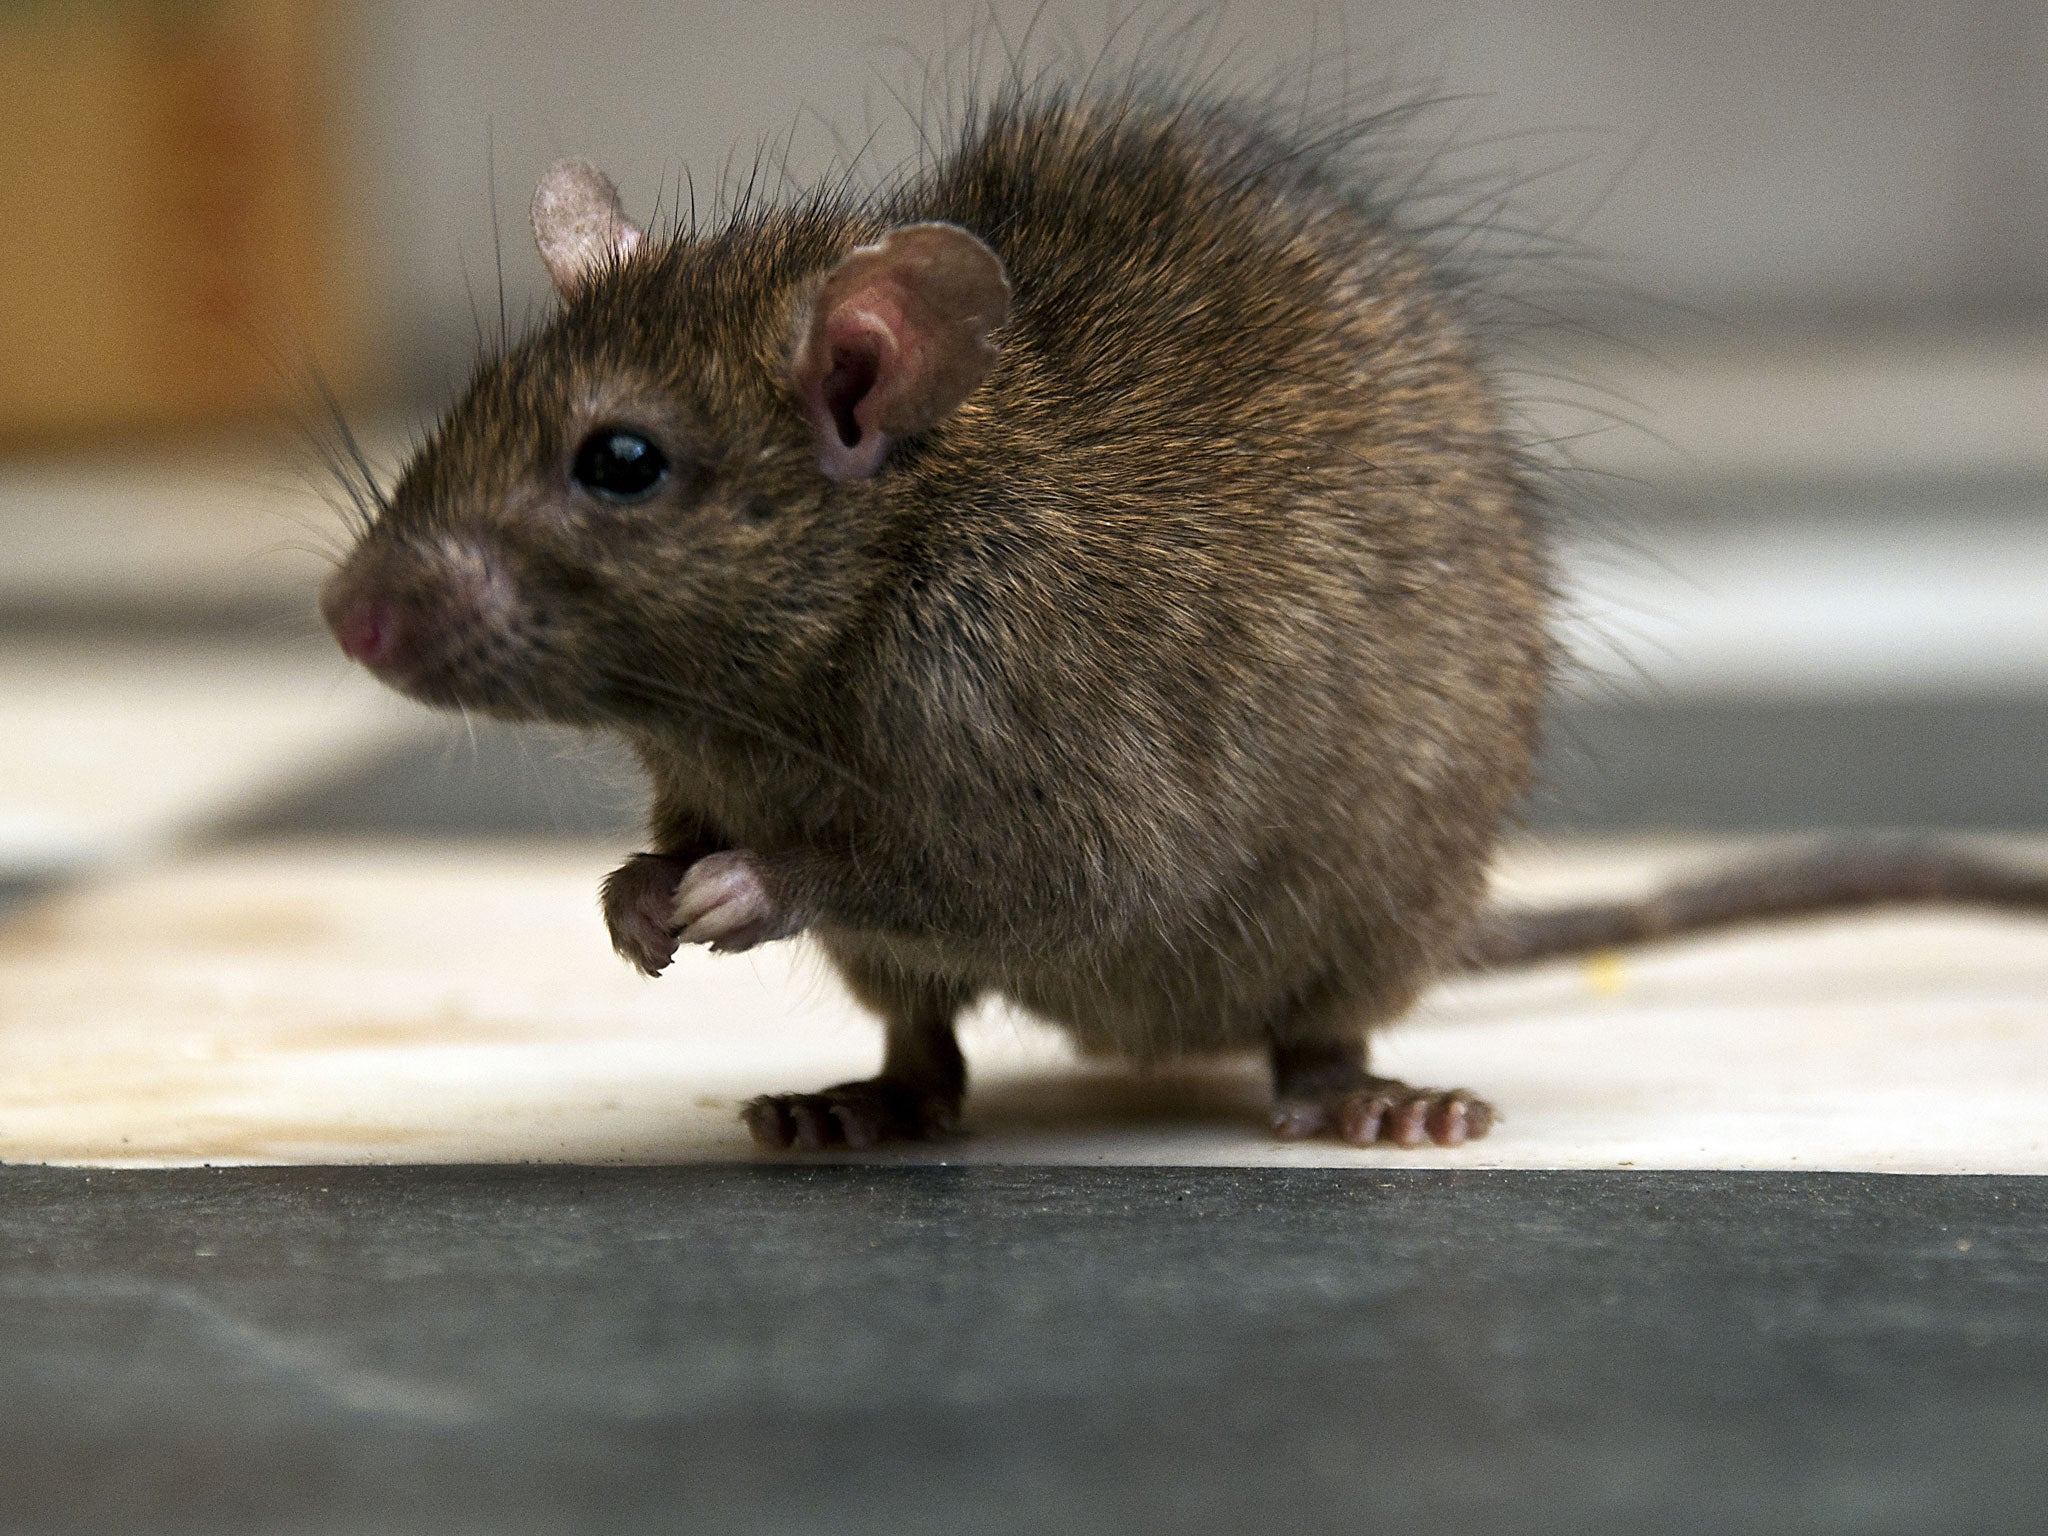 Rats as big as sheep: Rodents could evolve to fill niches as ...